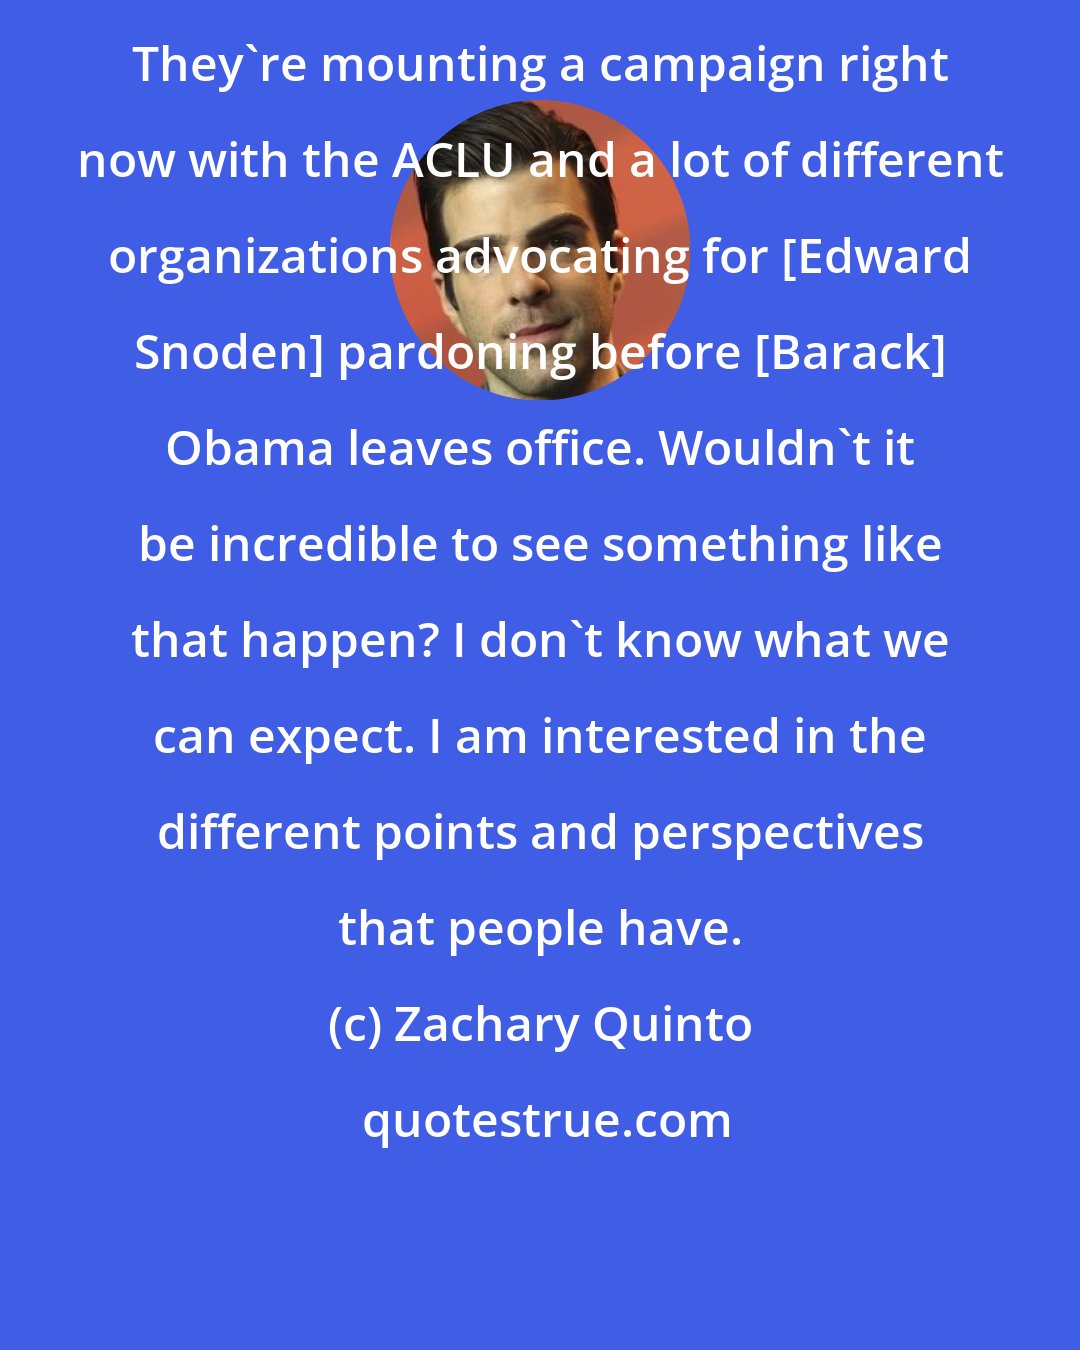 Zachary Quinto: They're mounting a campaign right now with the ACLU and a lot of different organizations advocating for [Edward Snoden] pardoning before [Barack] Obama leaves office. Wouldn't it be incredible to see something like that happen? I don't know what we can expect. I am interested in the different points and perspectives that people have.